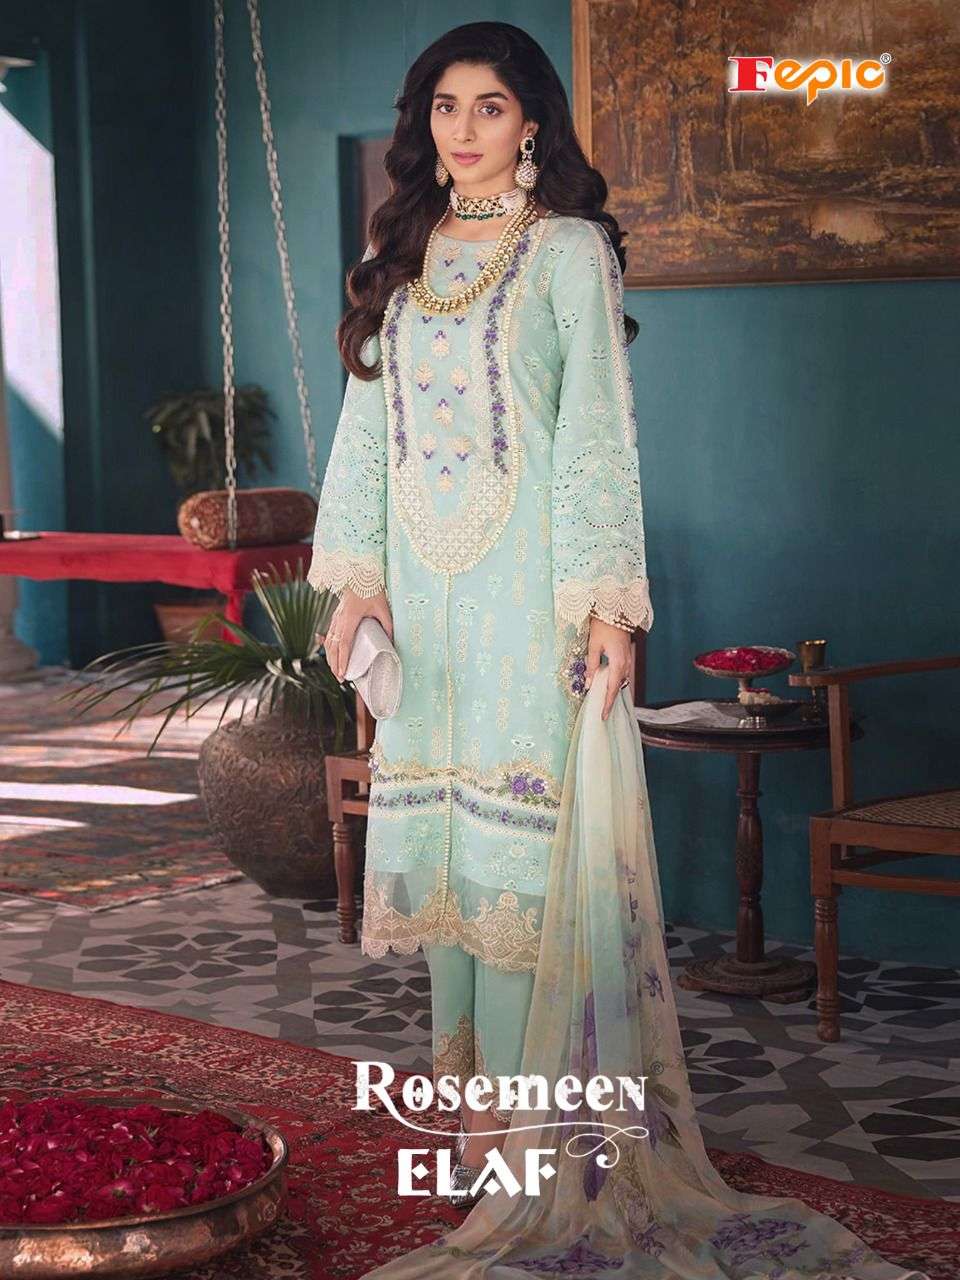 FEPIC ROSEMEEN ELAF DESIGNER COTTON EMBROIDERED PARTY WEAR SUITS IN WHOLESALE RATE